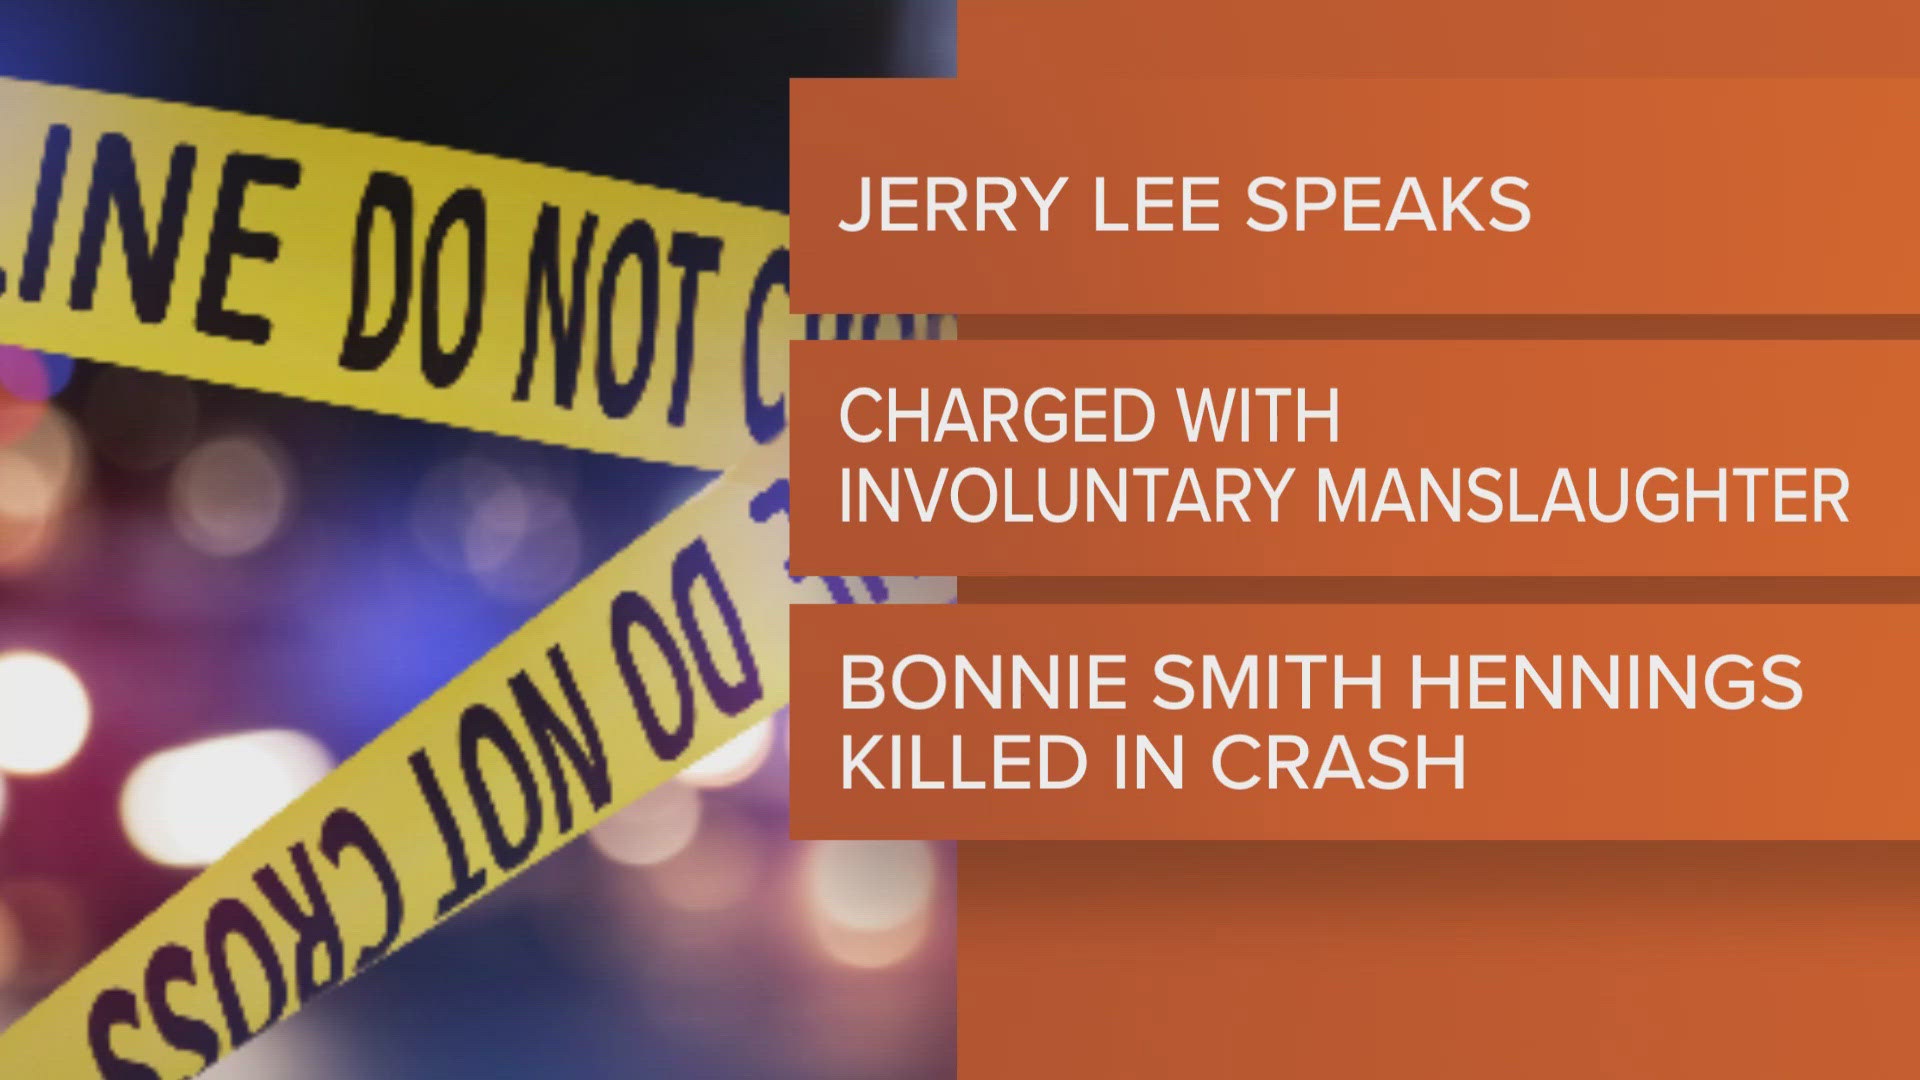 Jerry Lee Speaks is now charged with involuntary manslaughter.